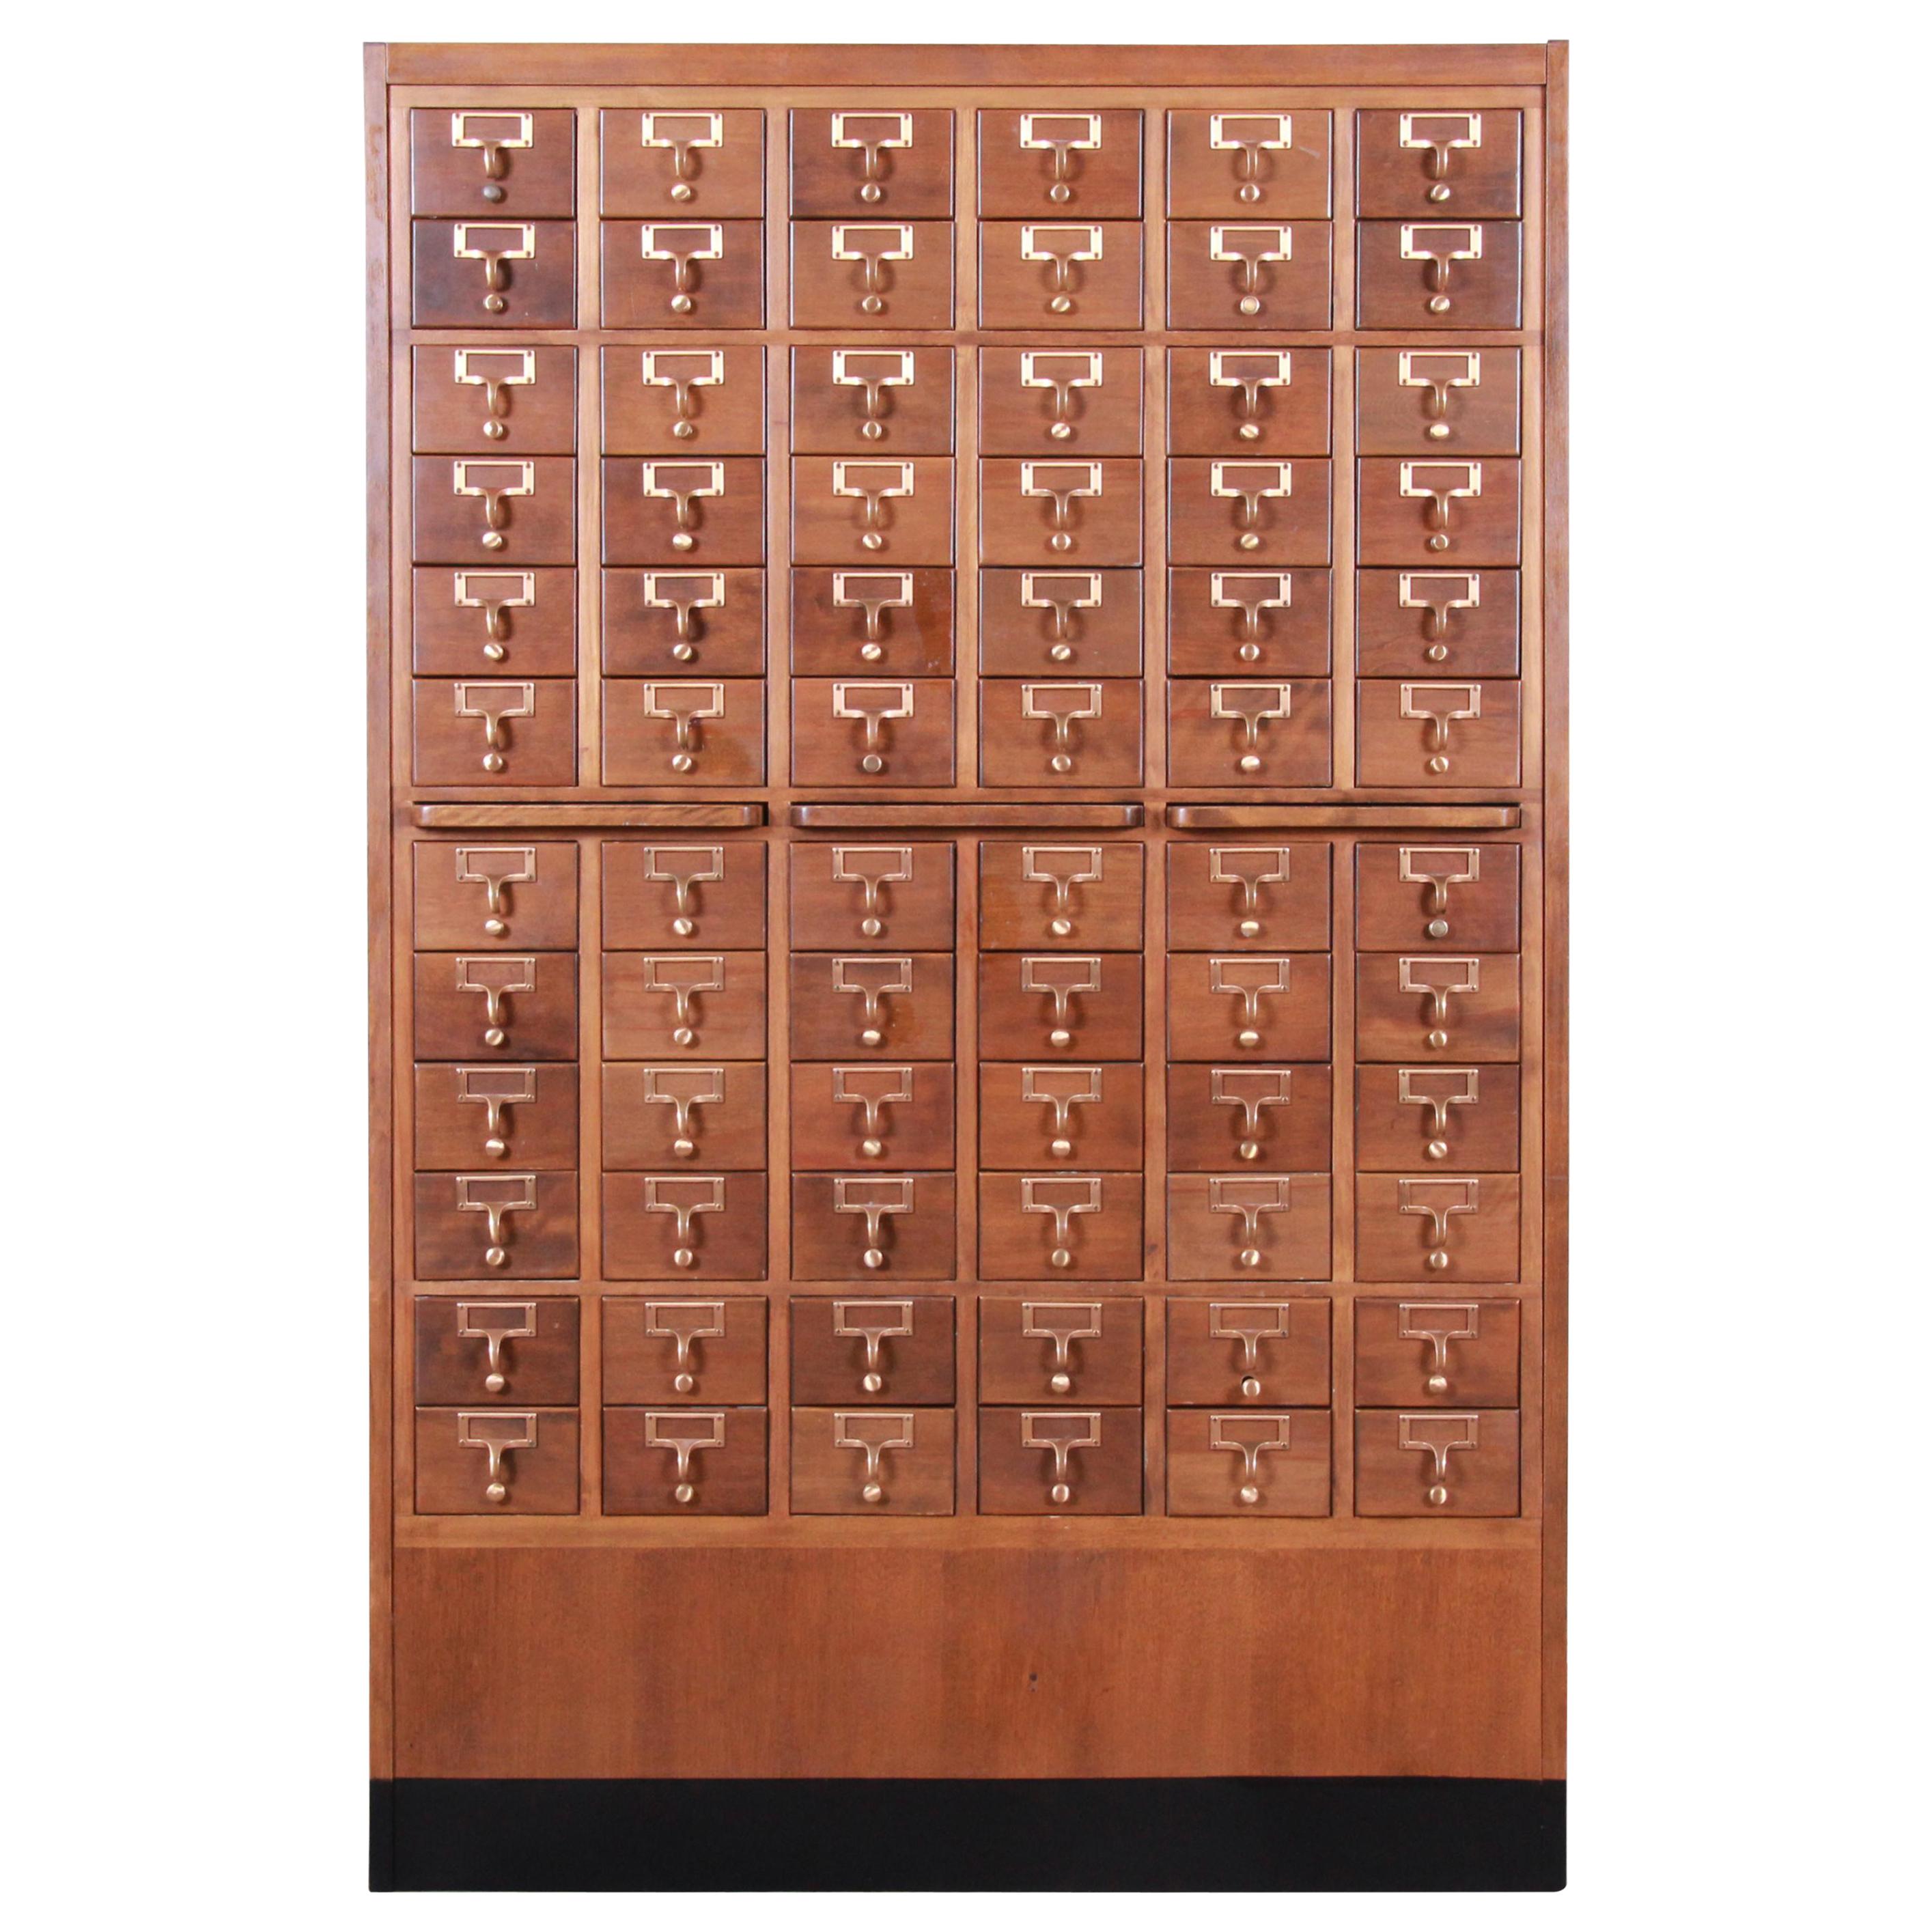 Midcentury 72-Drawer Library Card Catalog